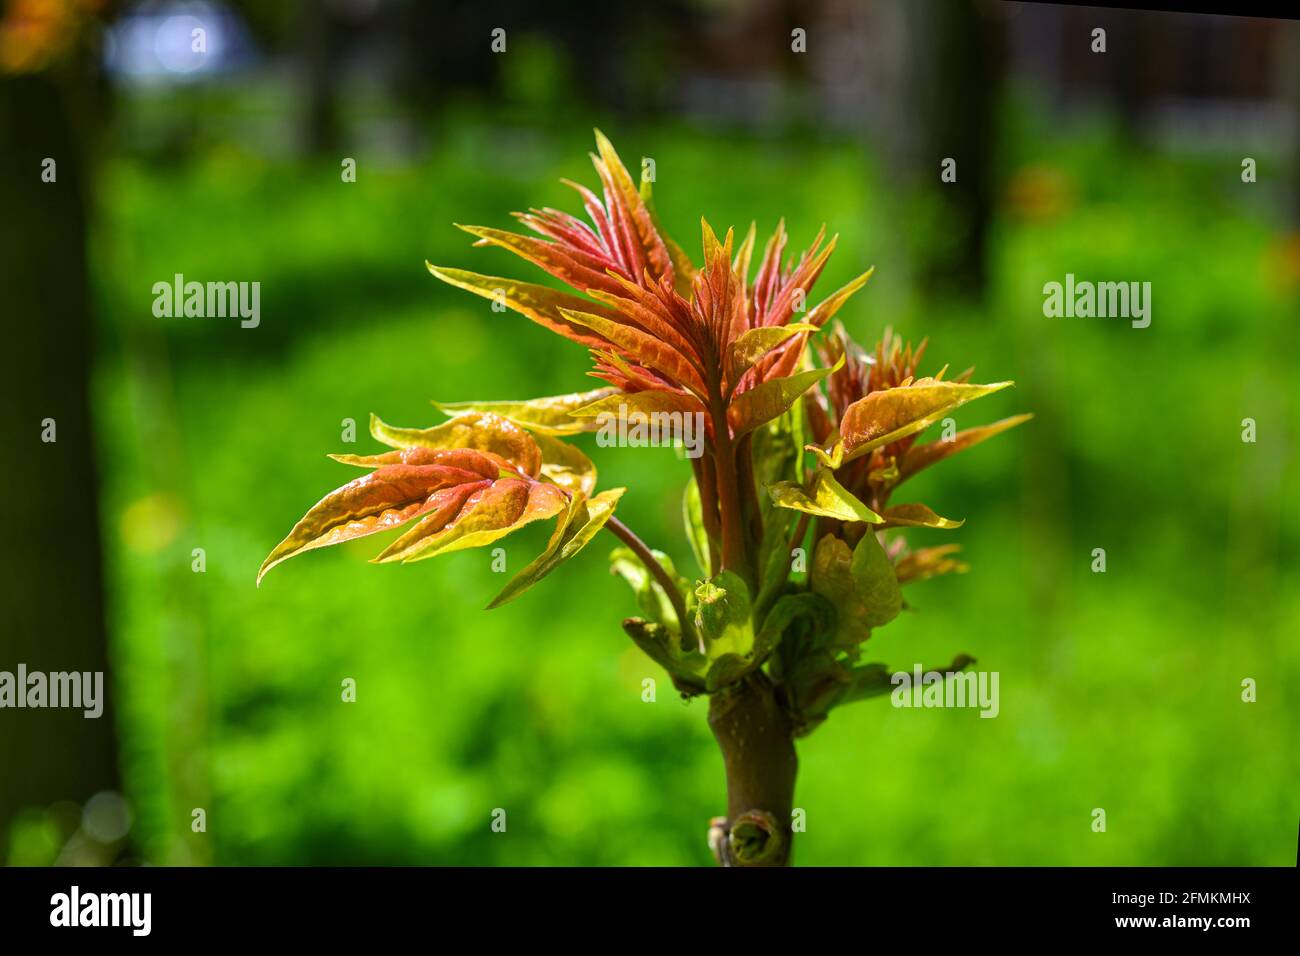 Buds bloom on a tree branch in spring. Very young green leaves. Macro photo. Texture of green leaves Stock Photo